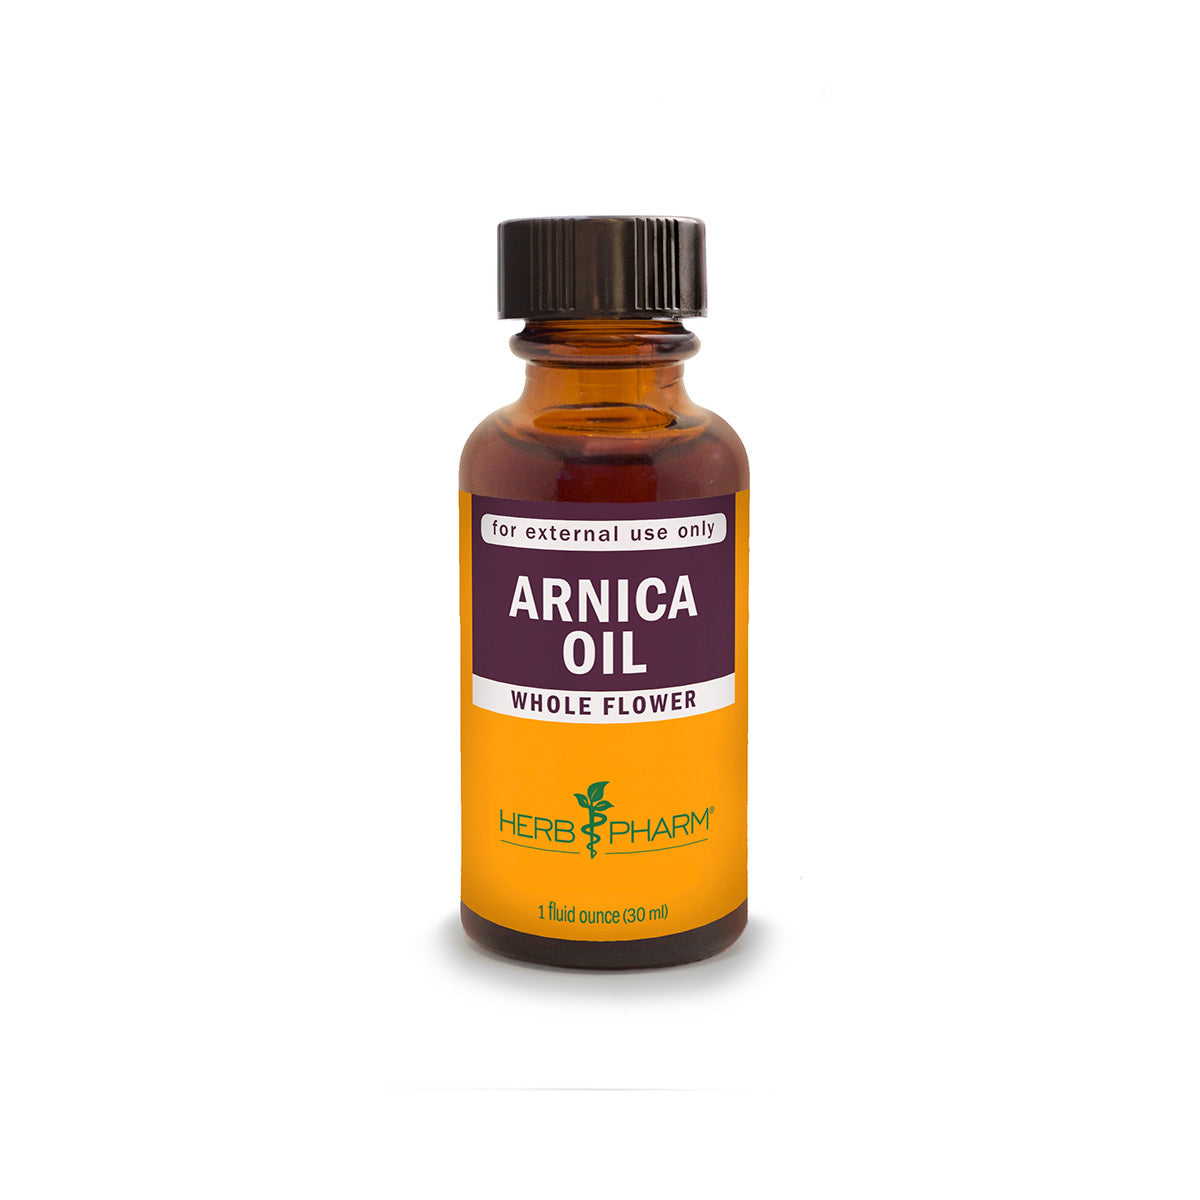 Primary image of Arnica Oil